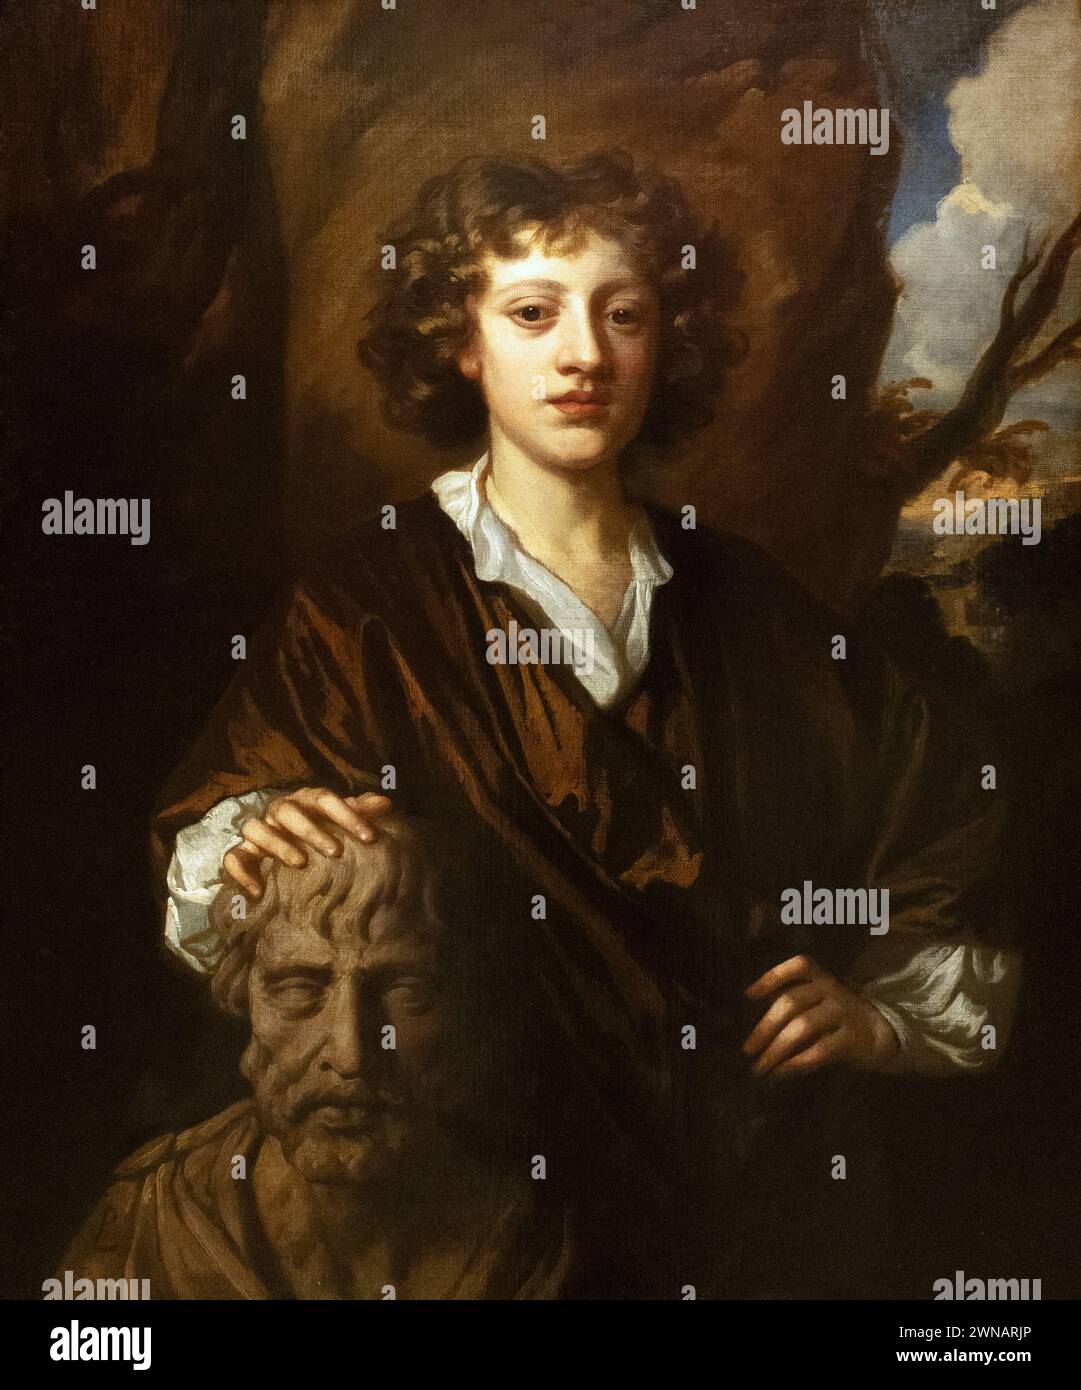 Sir Peter Lely painting, 'Bartholomew Beale', 1670 portrait of Mary Beale's son. 1600s Dutch portrait painter who spent most of his life in England Stock Photo